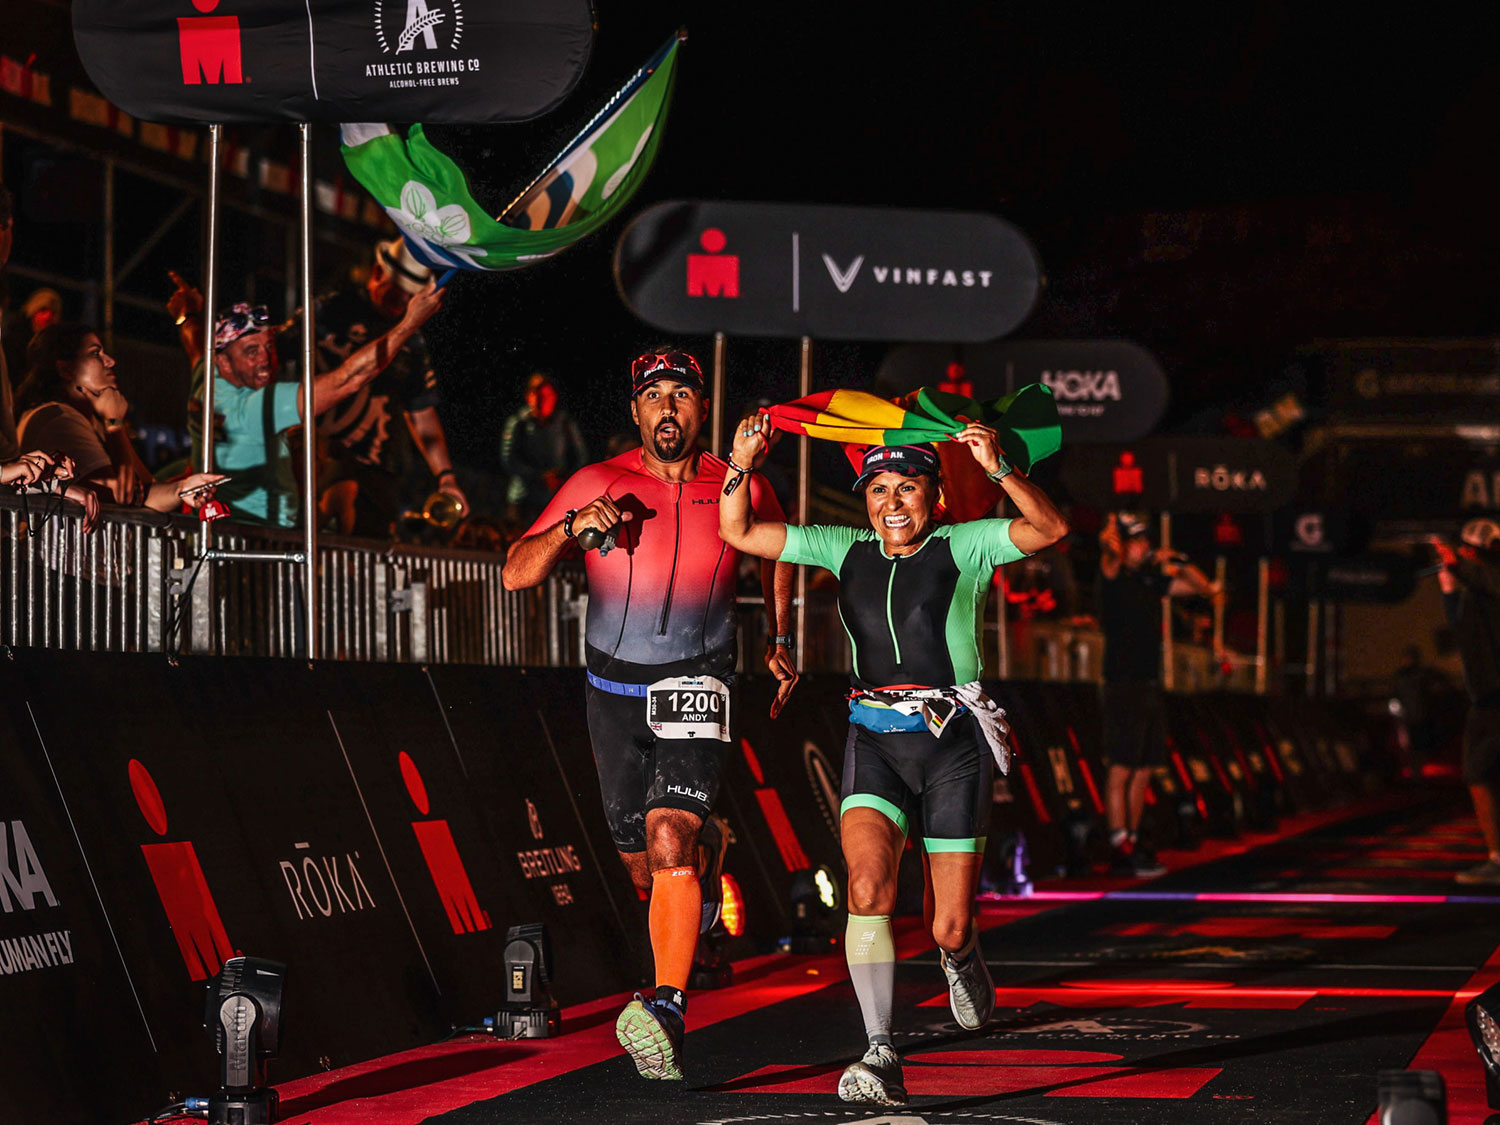 Andy Stainfield and Rose Pantoja on finishing line of Ironman event